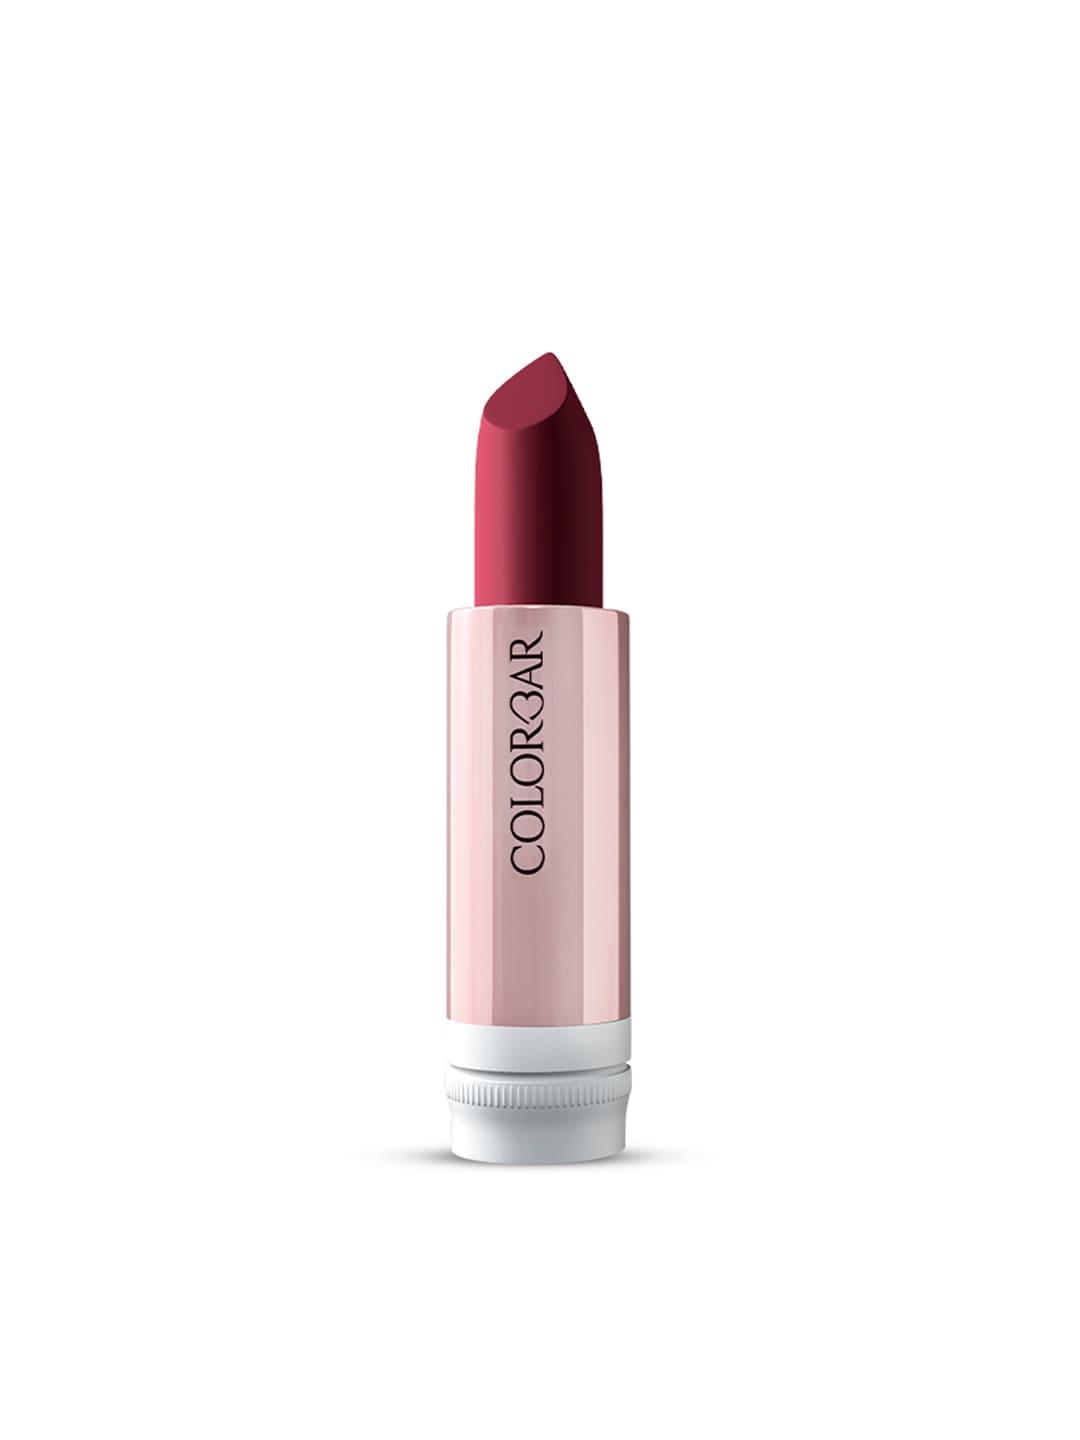 colorbar-take-me-as-i-am-vegan-matte-lipstick-refill-with-vitamin-e---marked-008